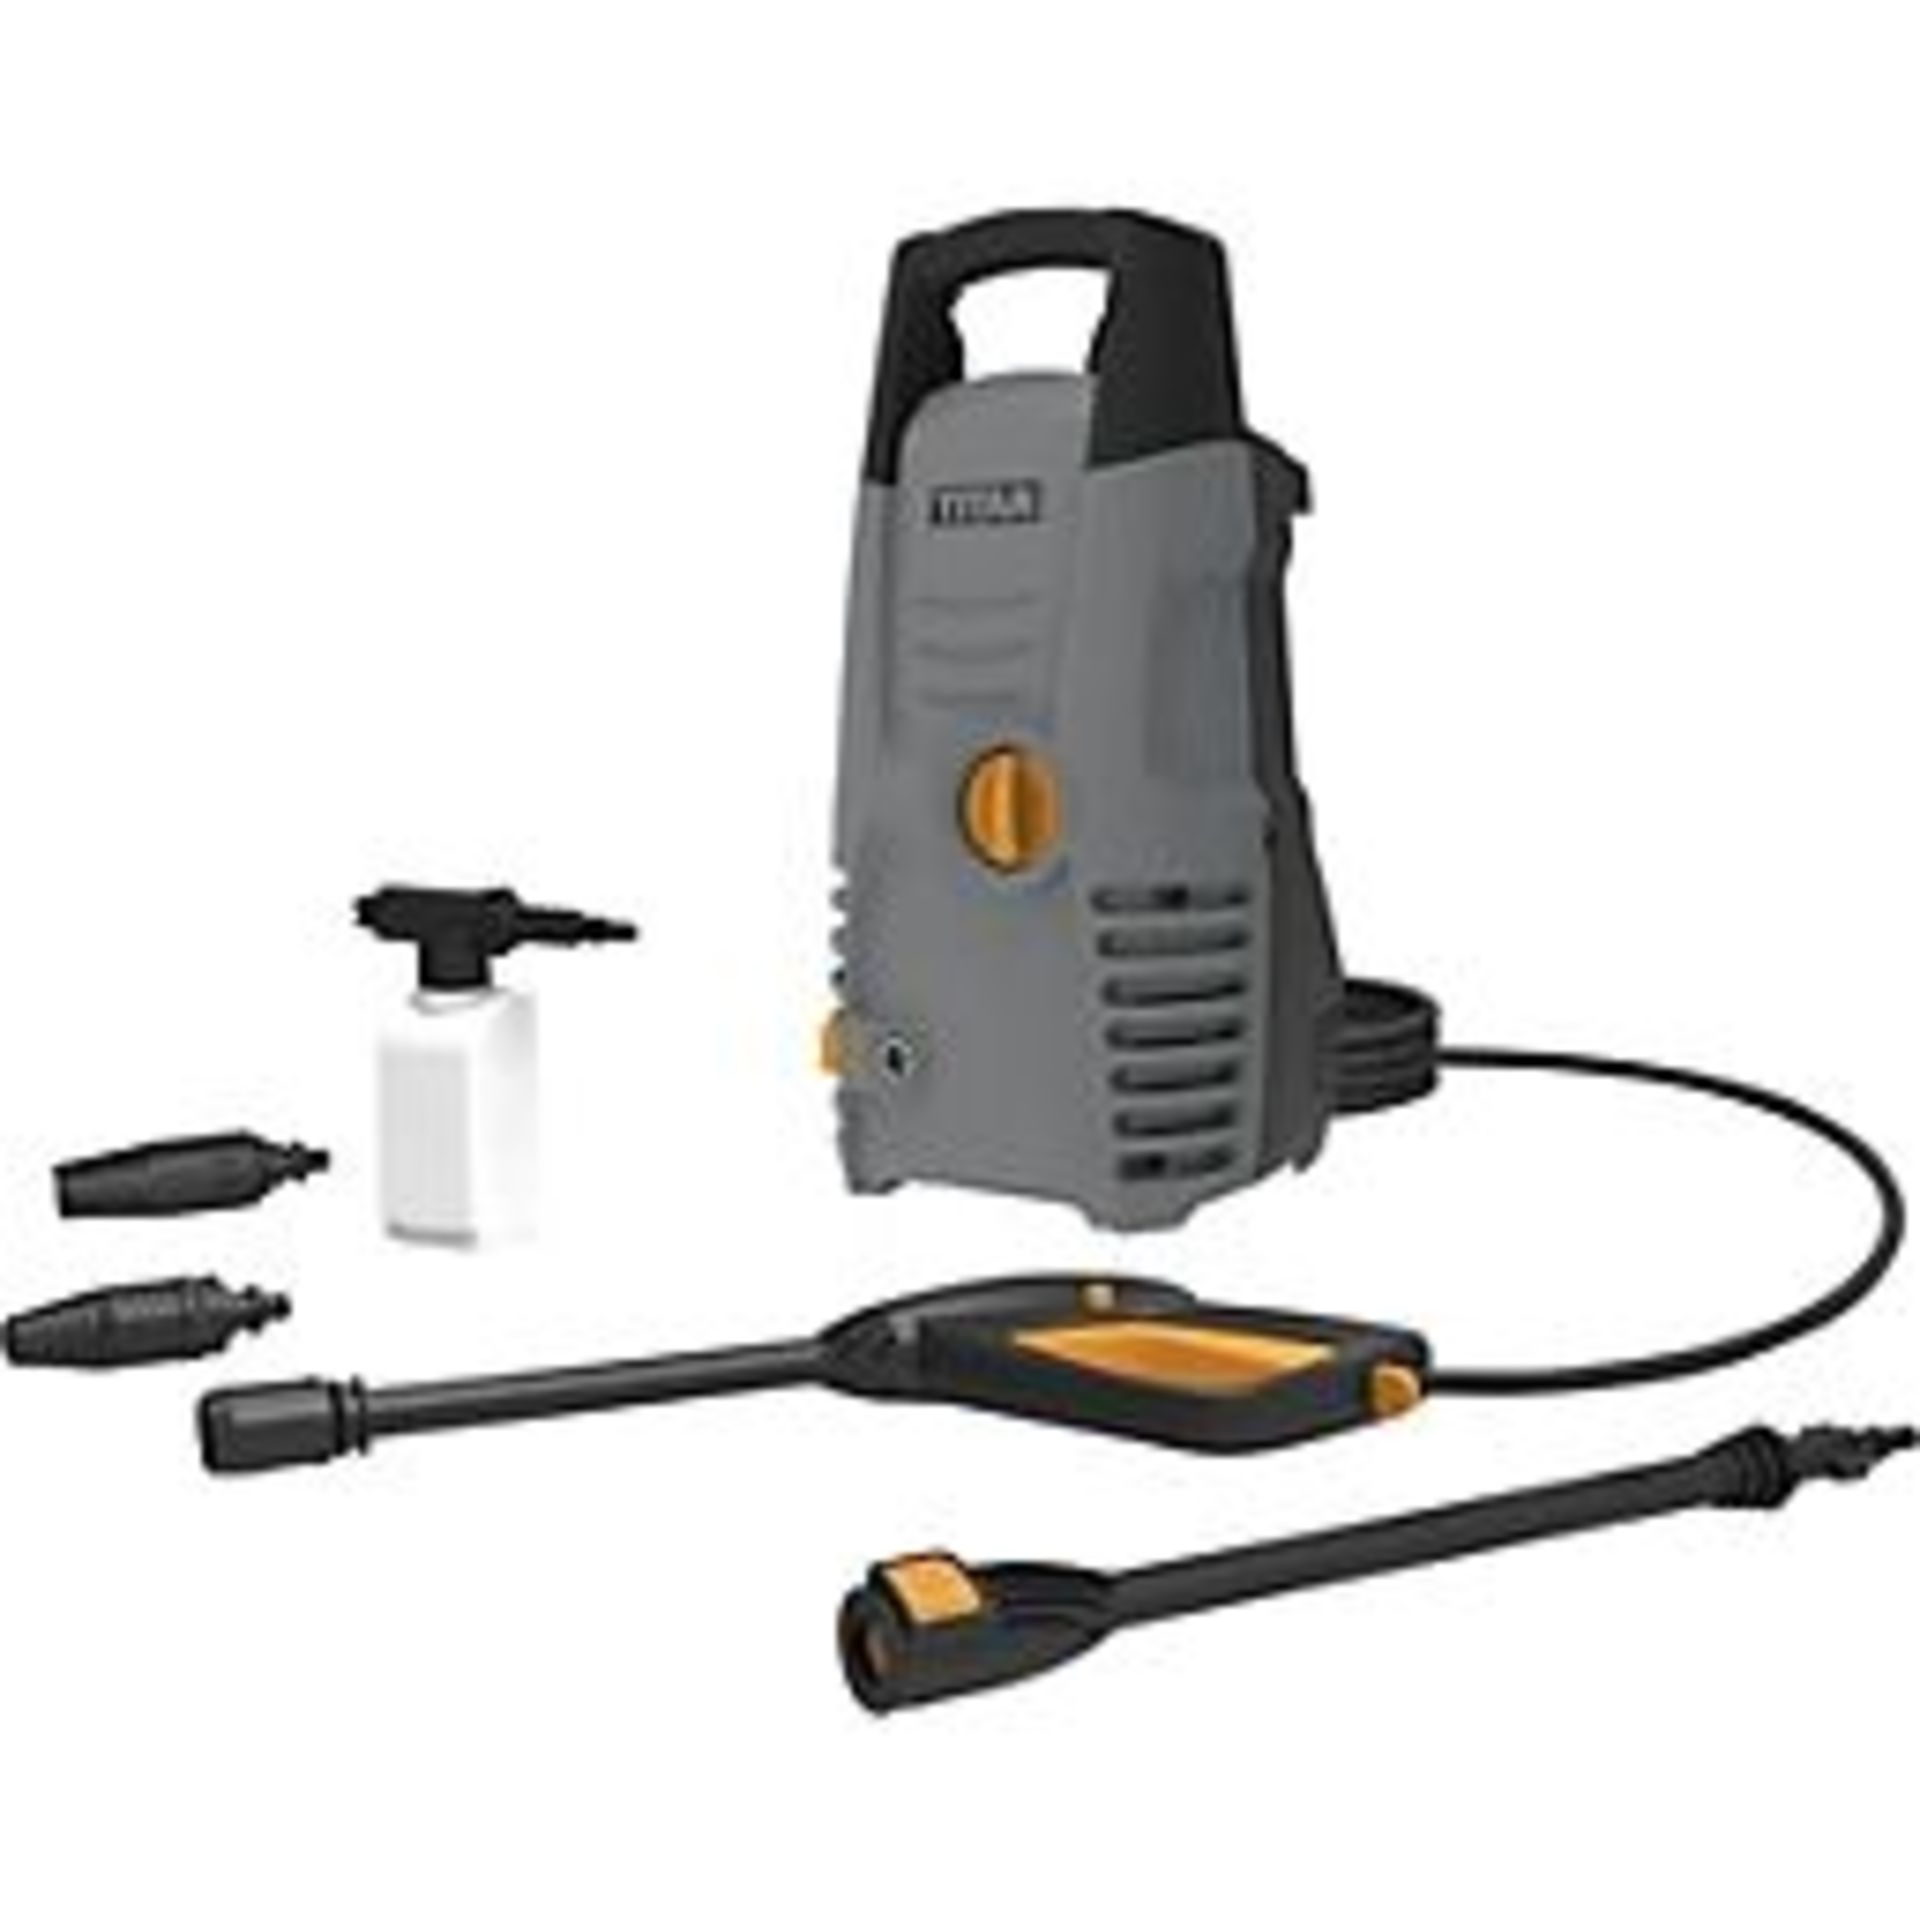 TITAN 100BAR ELECTRIC HIGH PRESSURE WASHER 1.3KW 230V. - R14.13. Compact design with space-saving